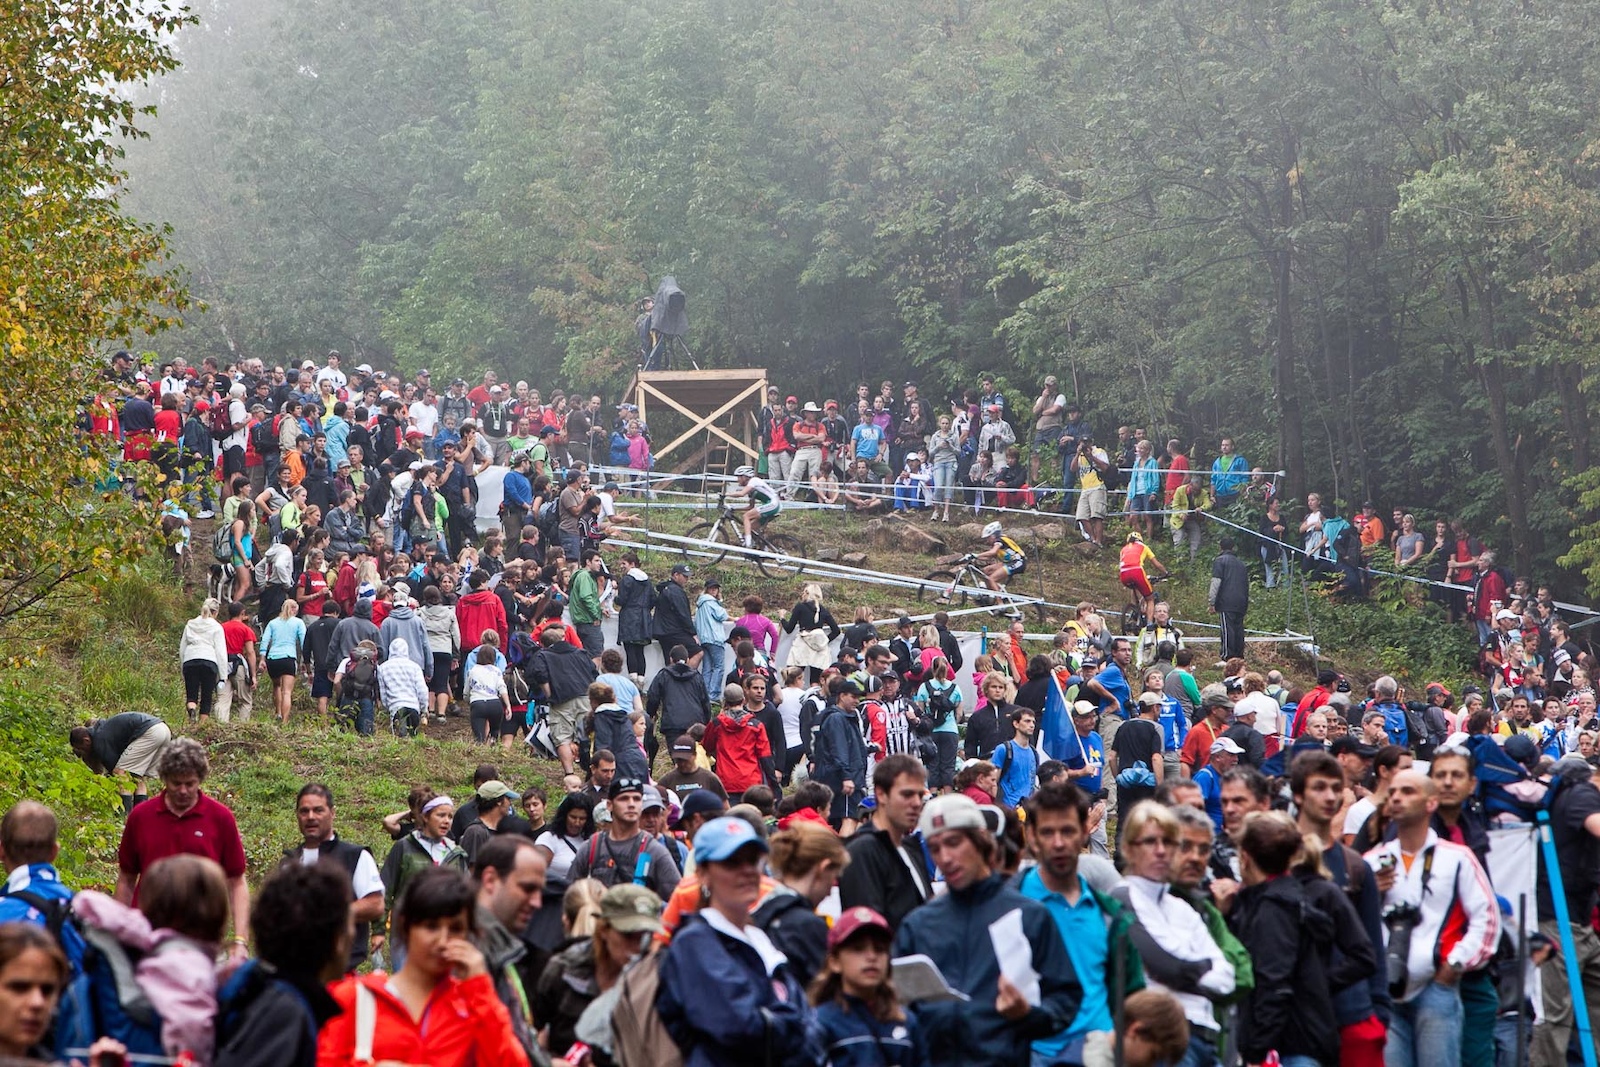 First UCI World Championships at Mont-Sainte-Anne, 2010

Credit: Andre-Olivier Lyra